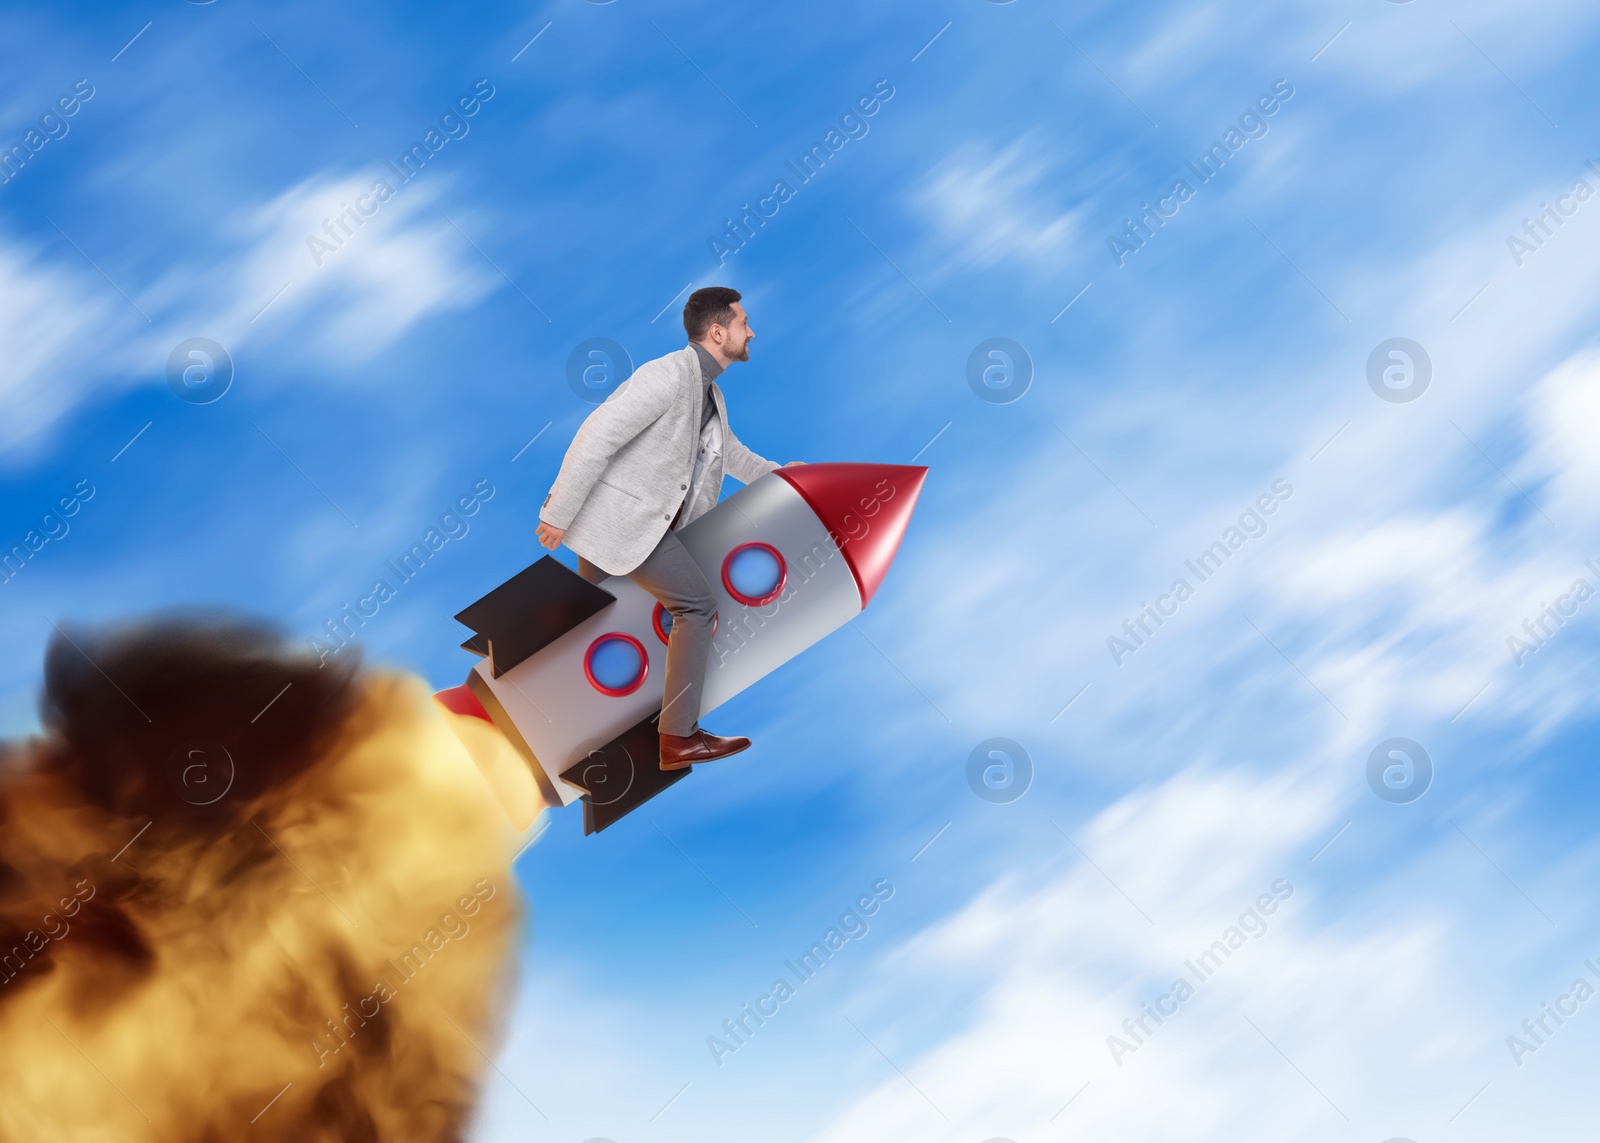 Image of Successful business startup. Happy man sitting on rocket rushing through sky. Illustration of spaceship